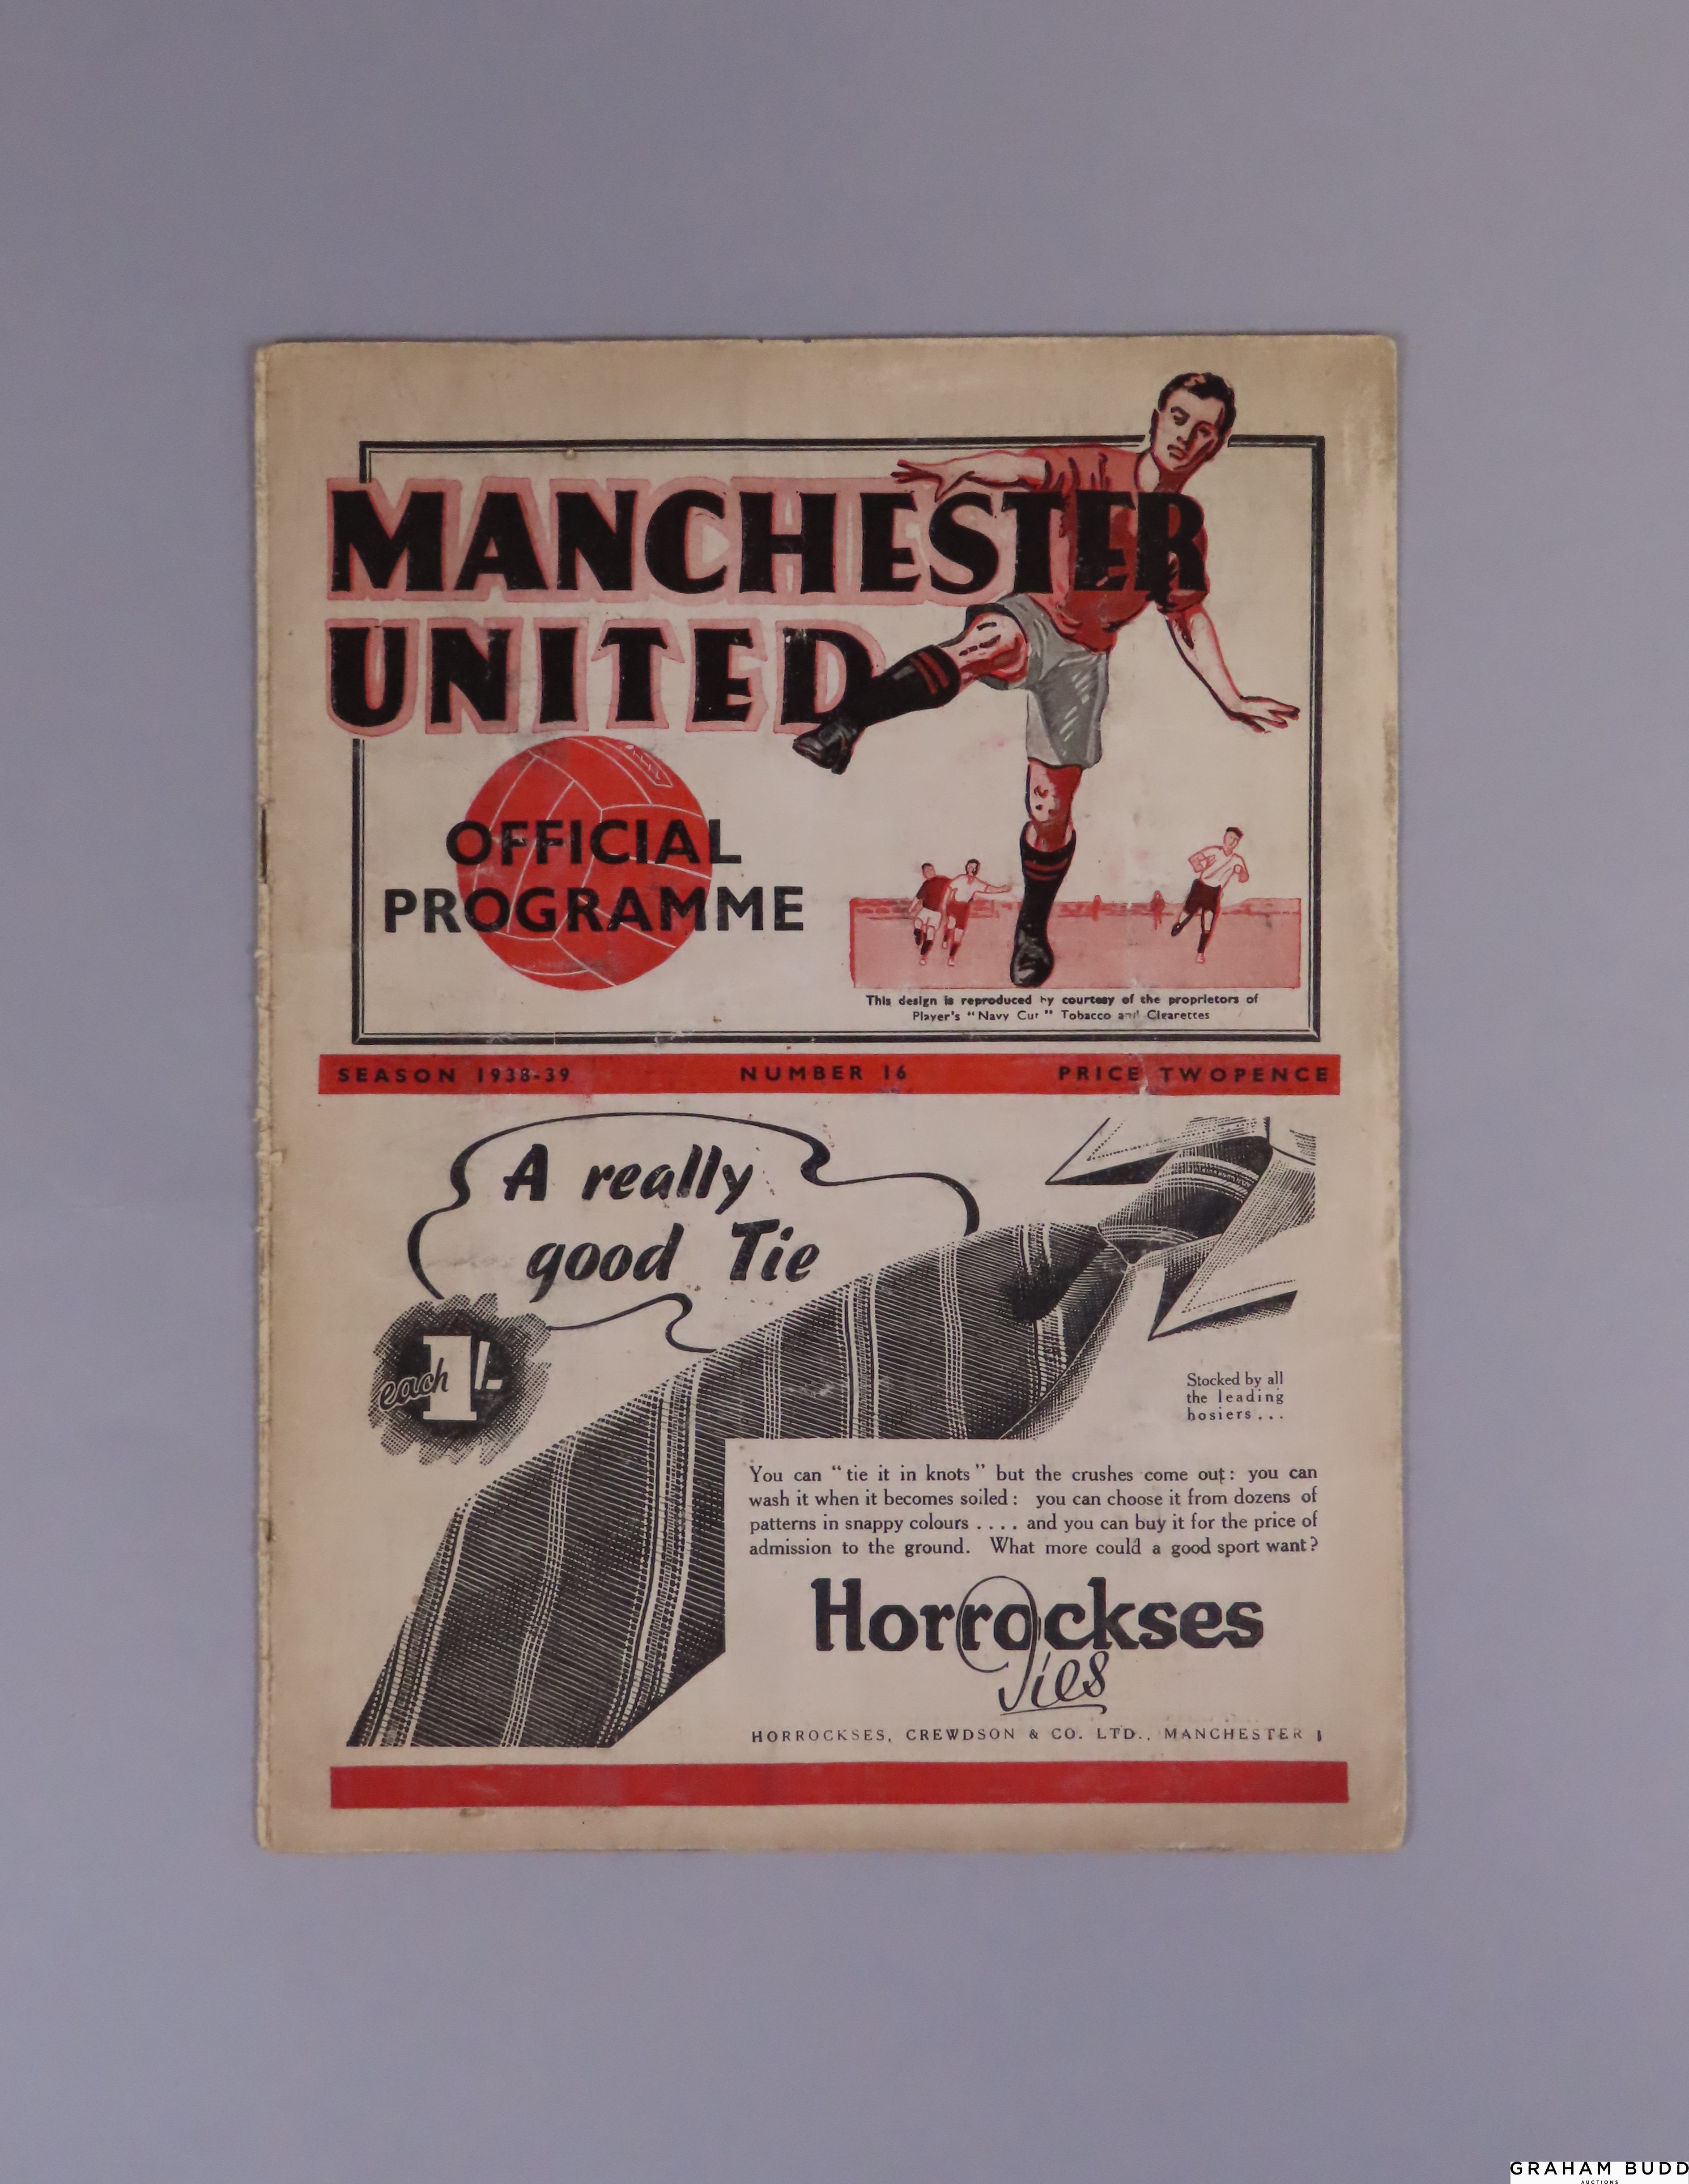 Manchester United v. Derby County, home league match programme, 1939